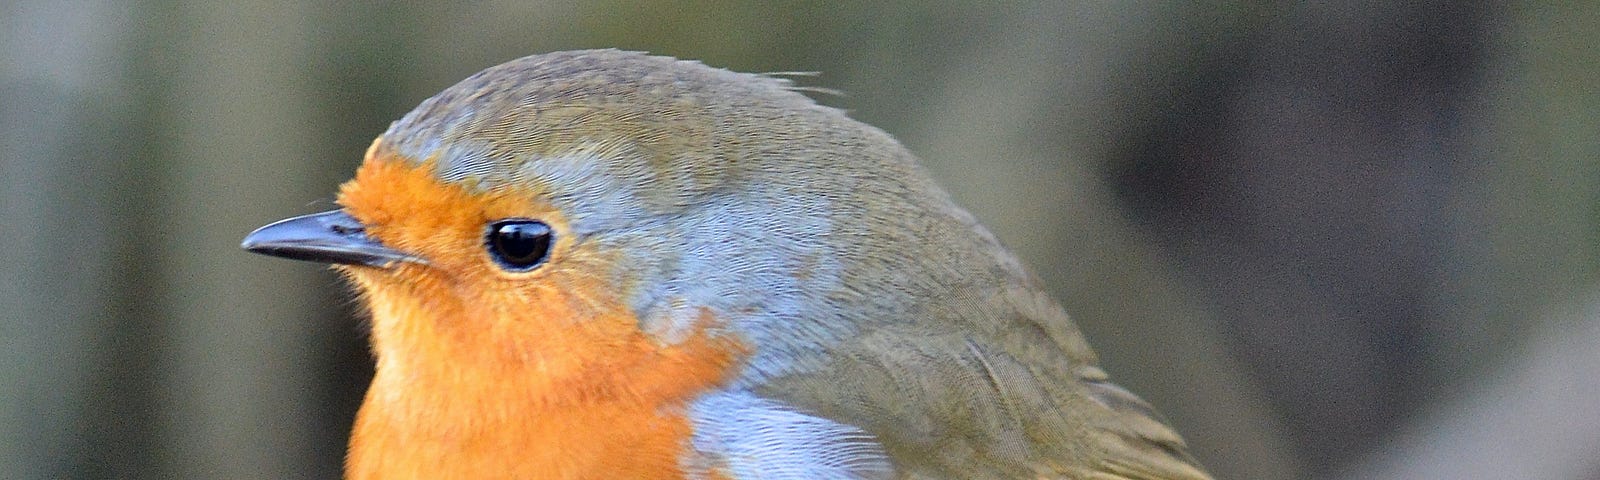 A tiny bird with an orange and blue chest stands on an old log